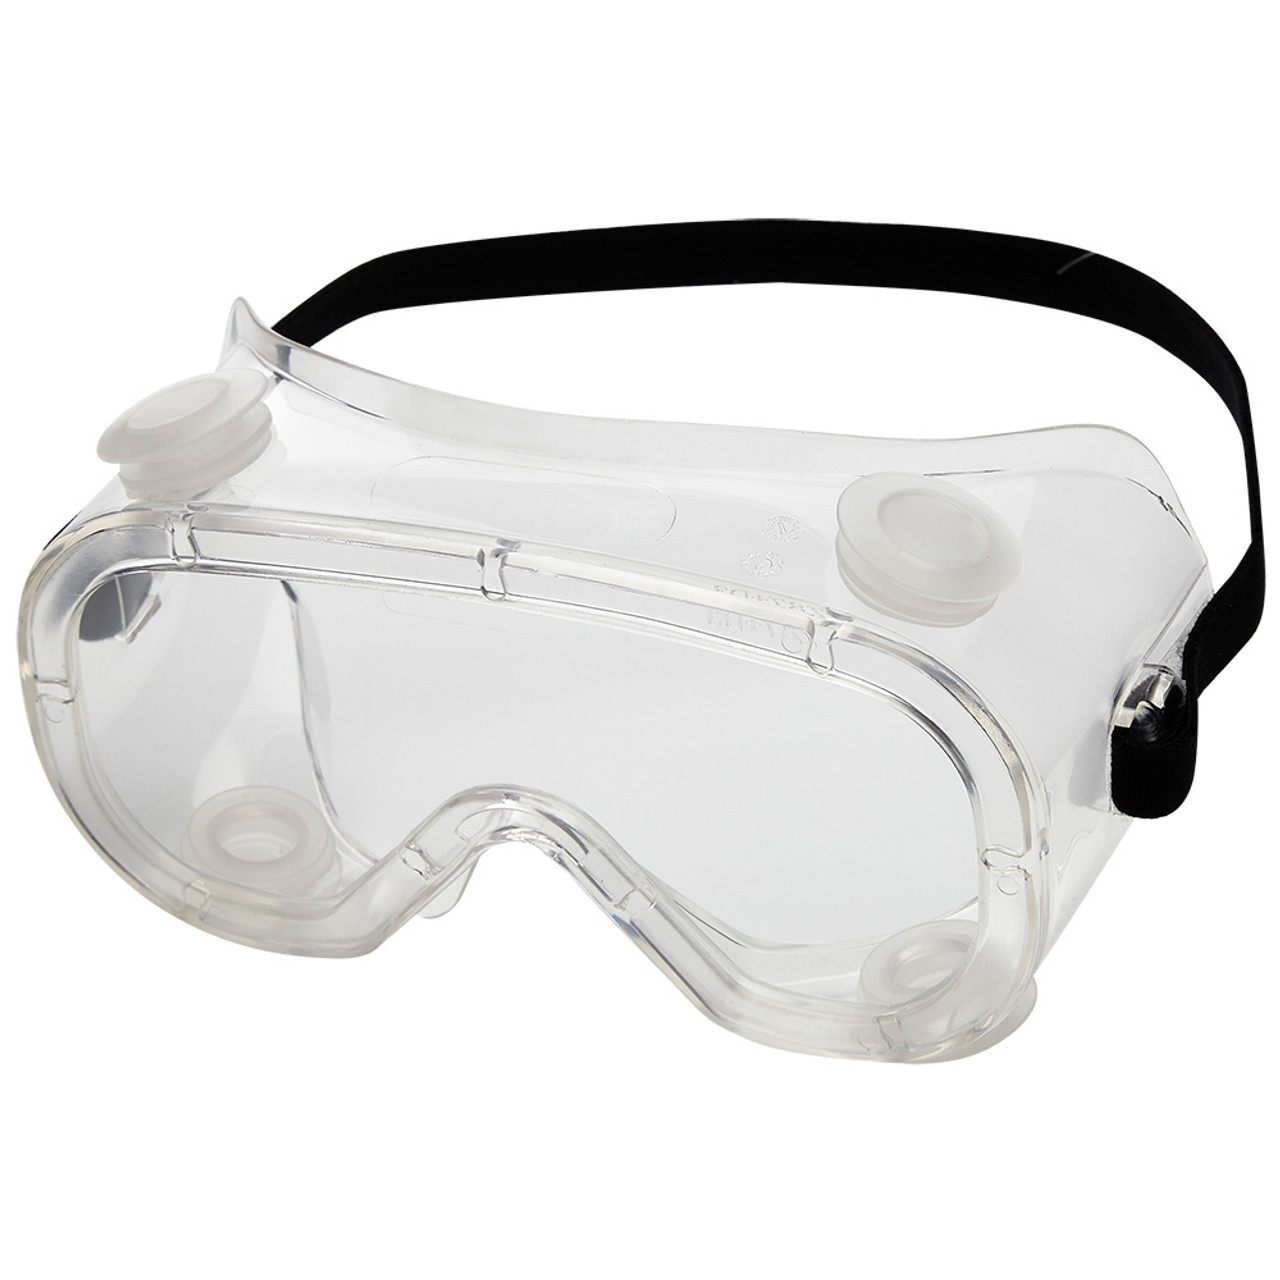 Sellstrom® 812 Series Indirect Vent Chemical Splash Safety Goggle - Clear  S81200